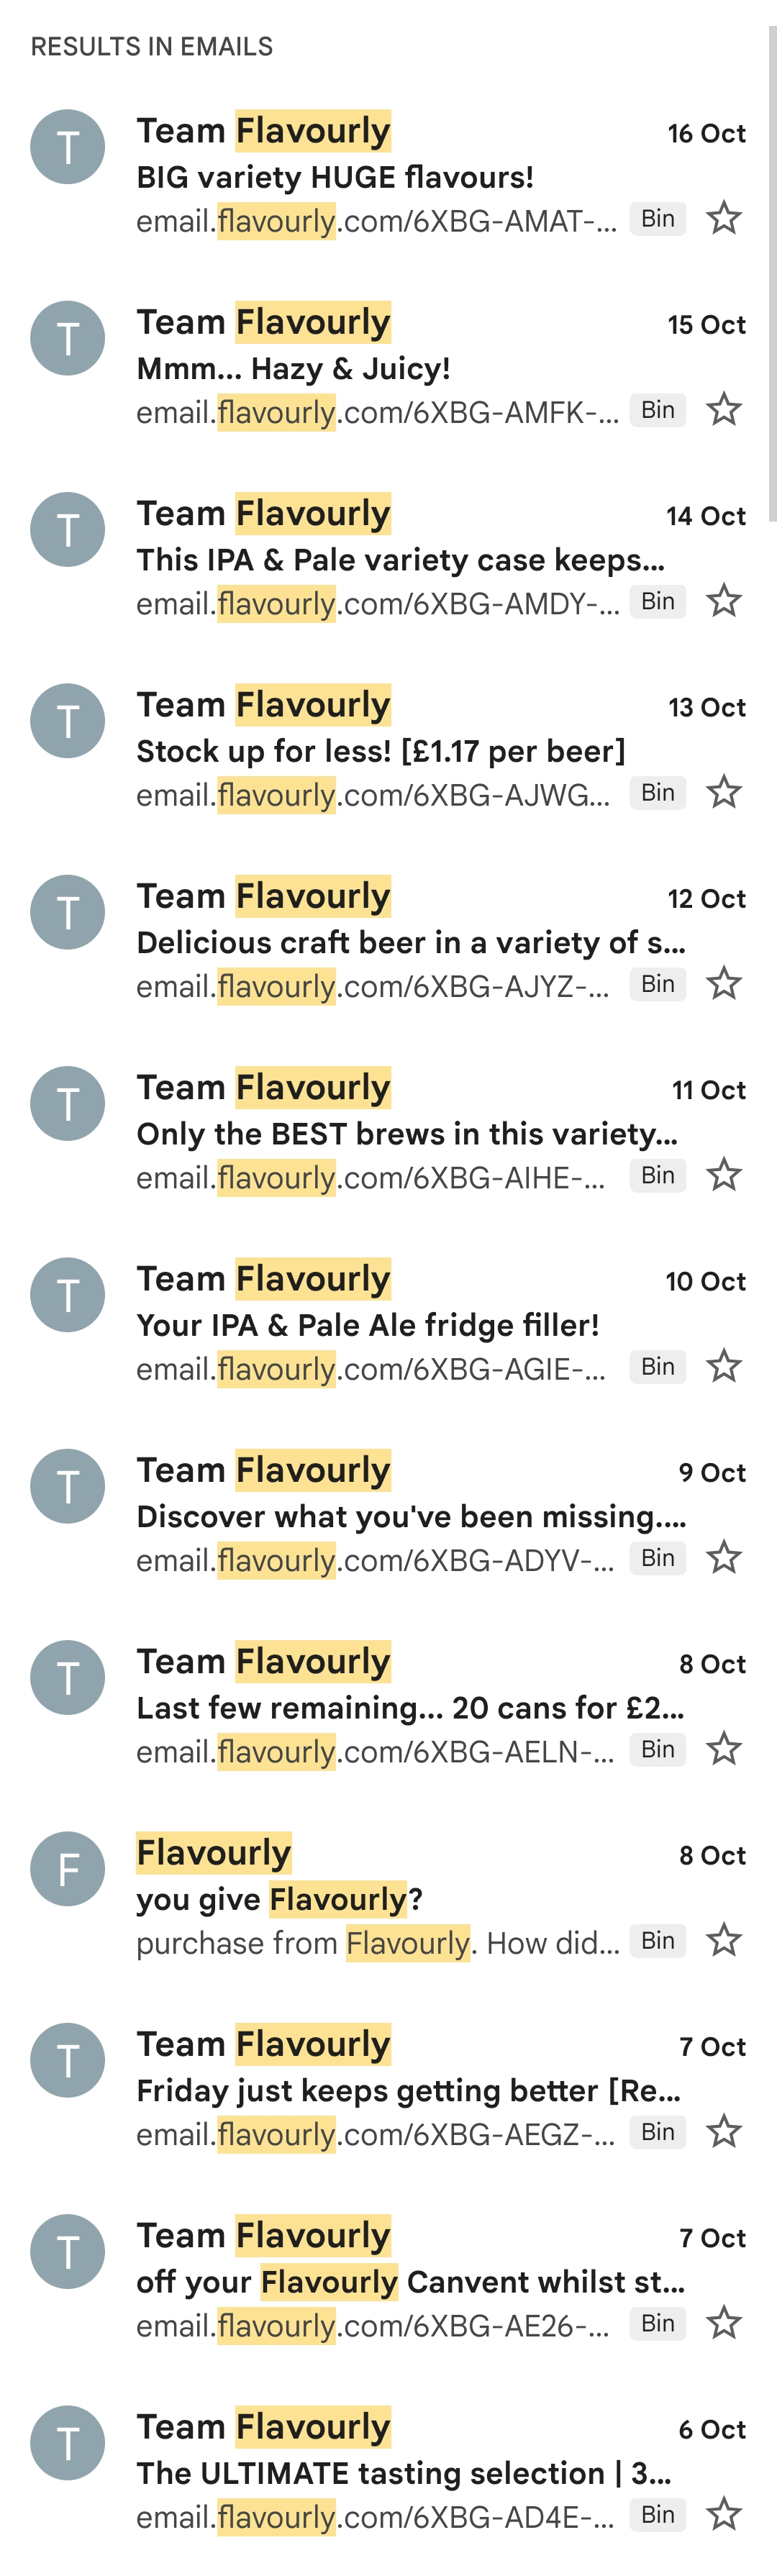 Screenshot of a long list of emails from Flavourly.